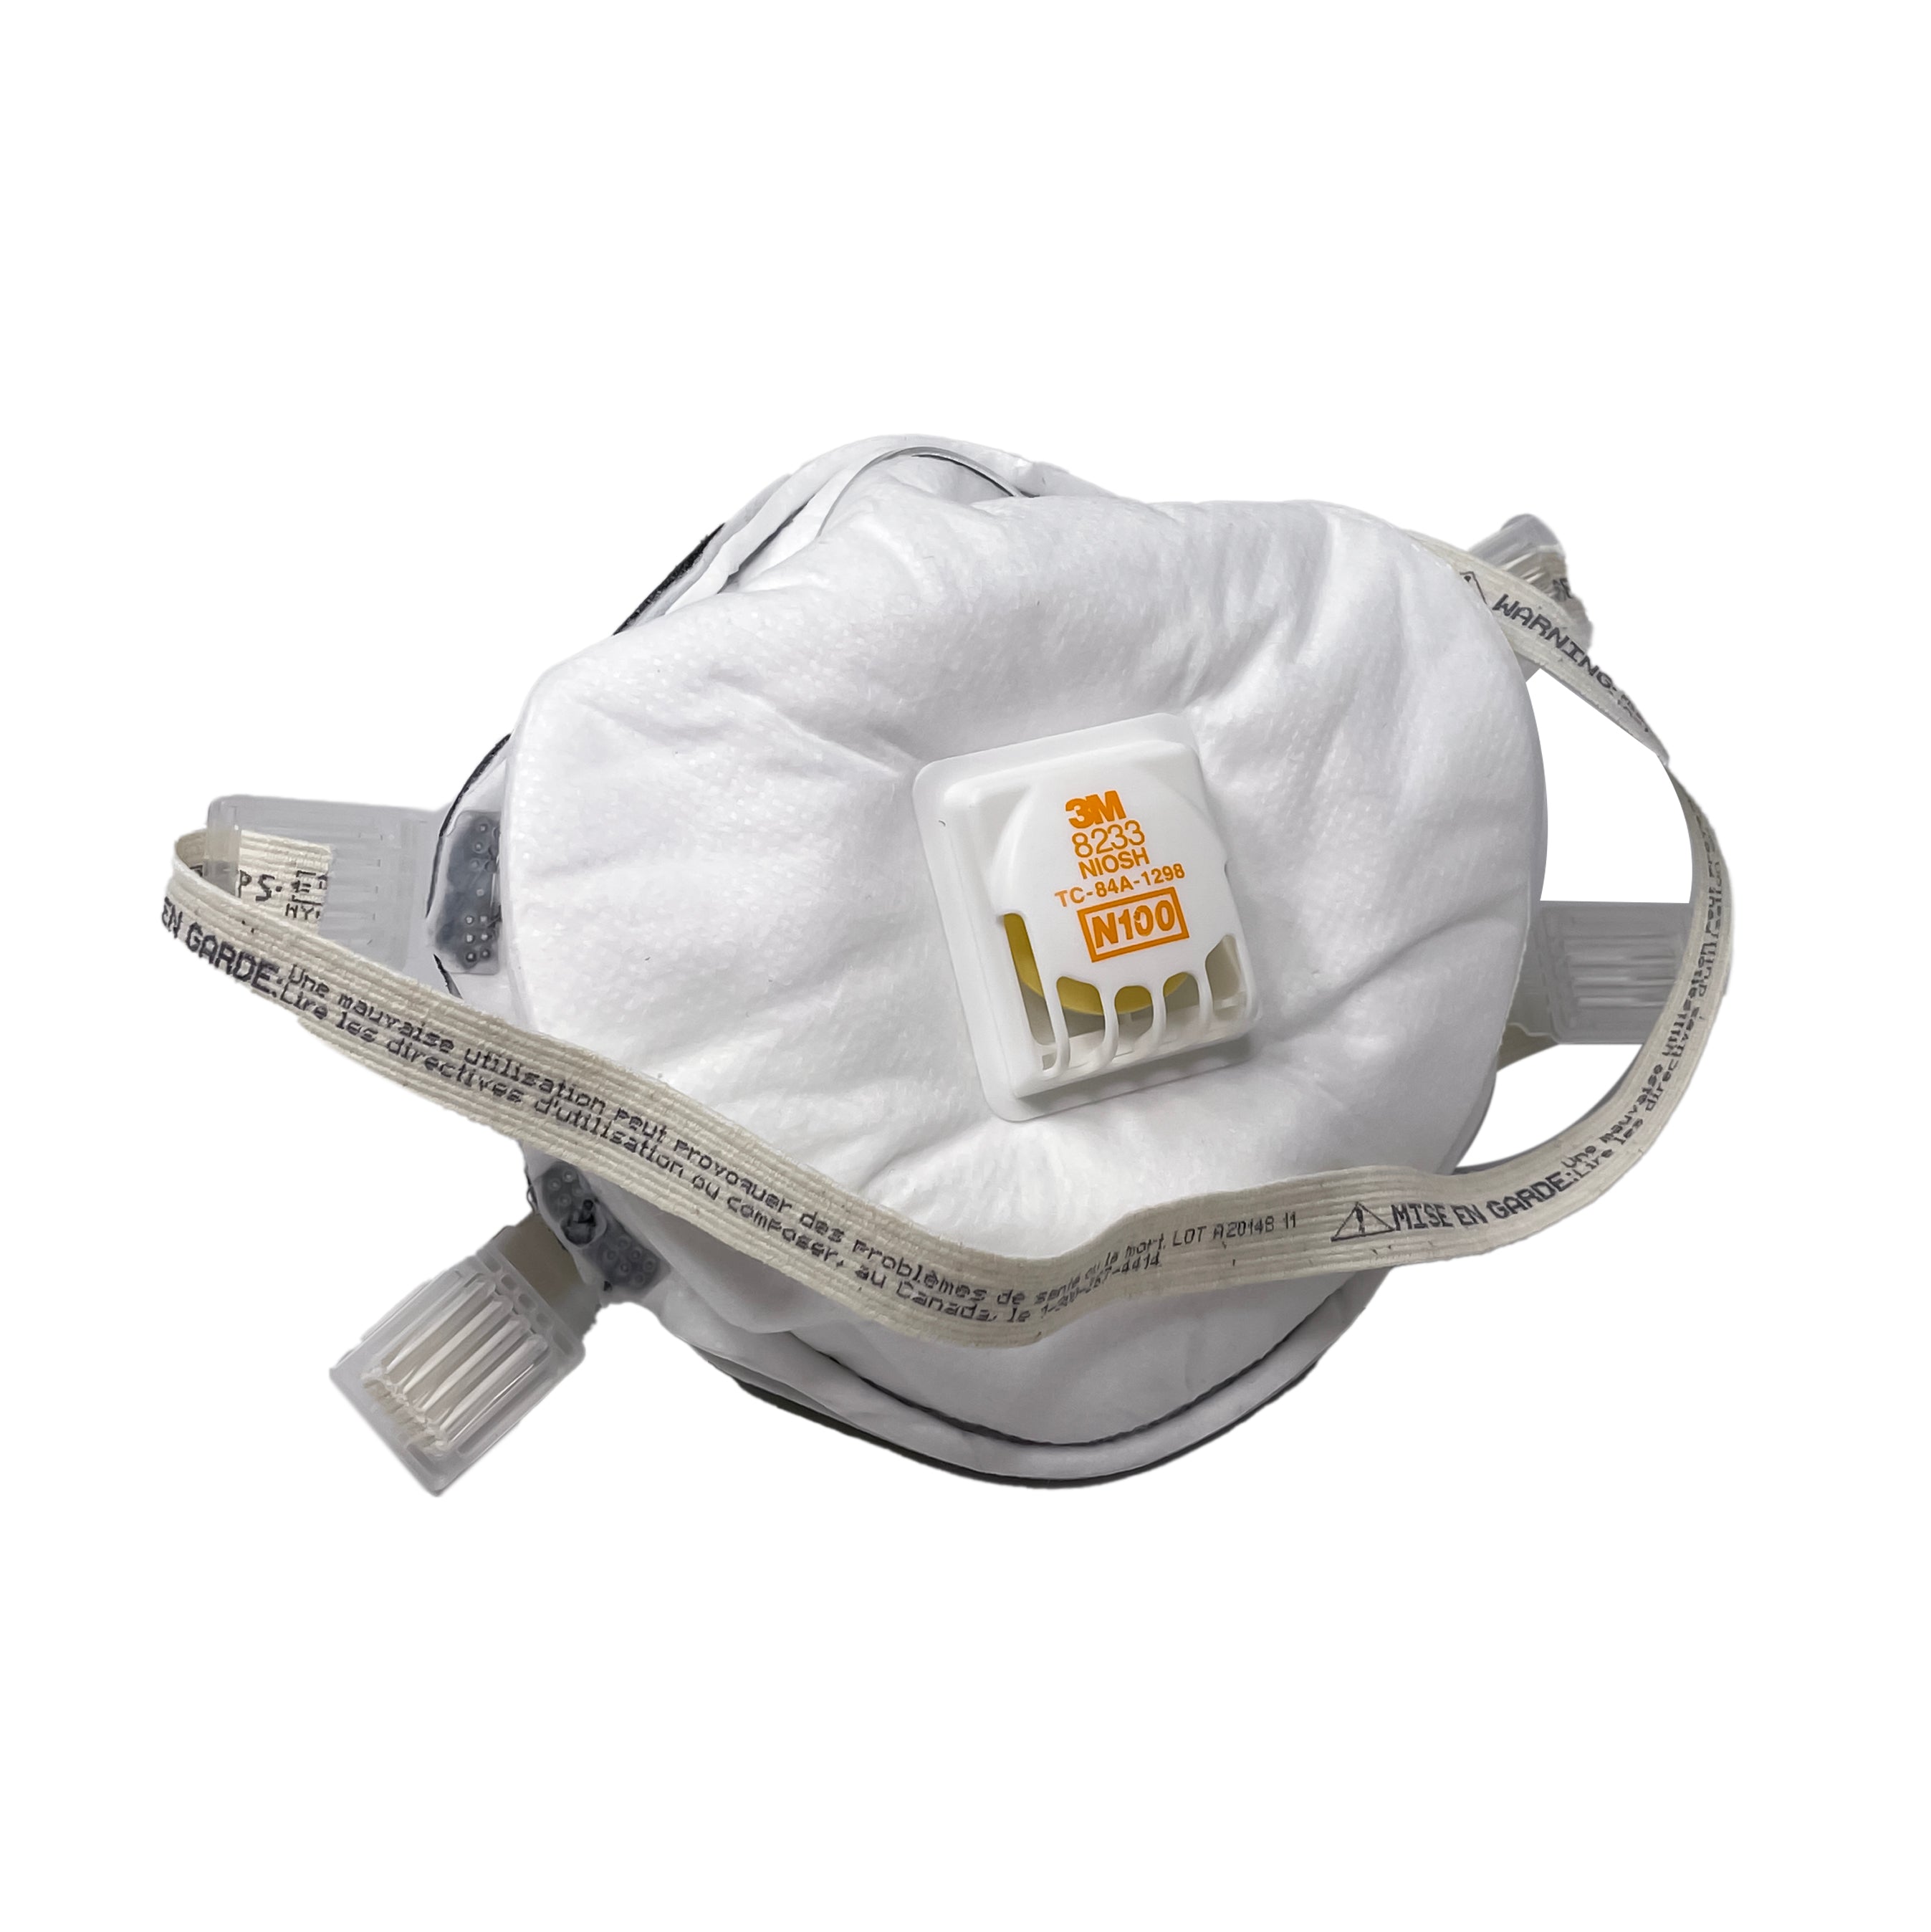 3M 8233 Particulate Respirator N100 – Armbrust American